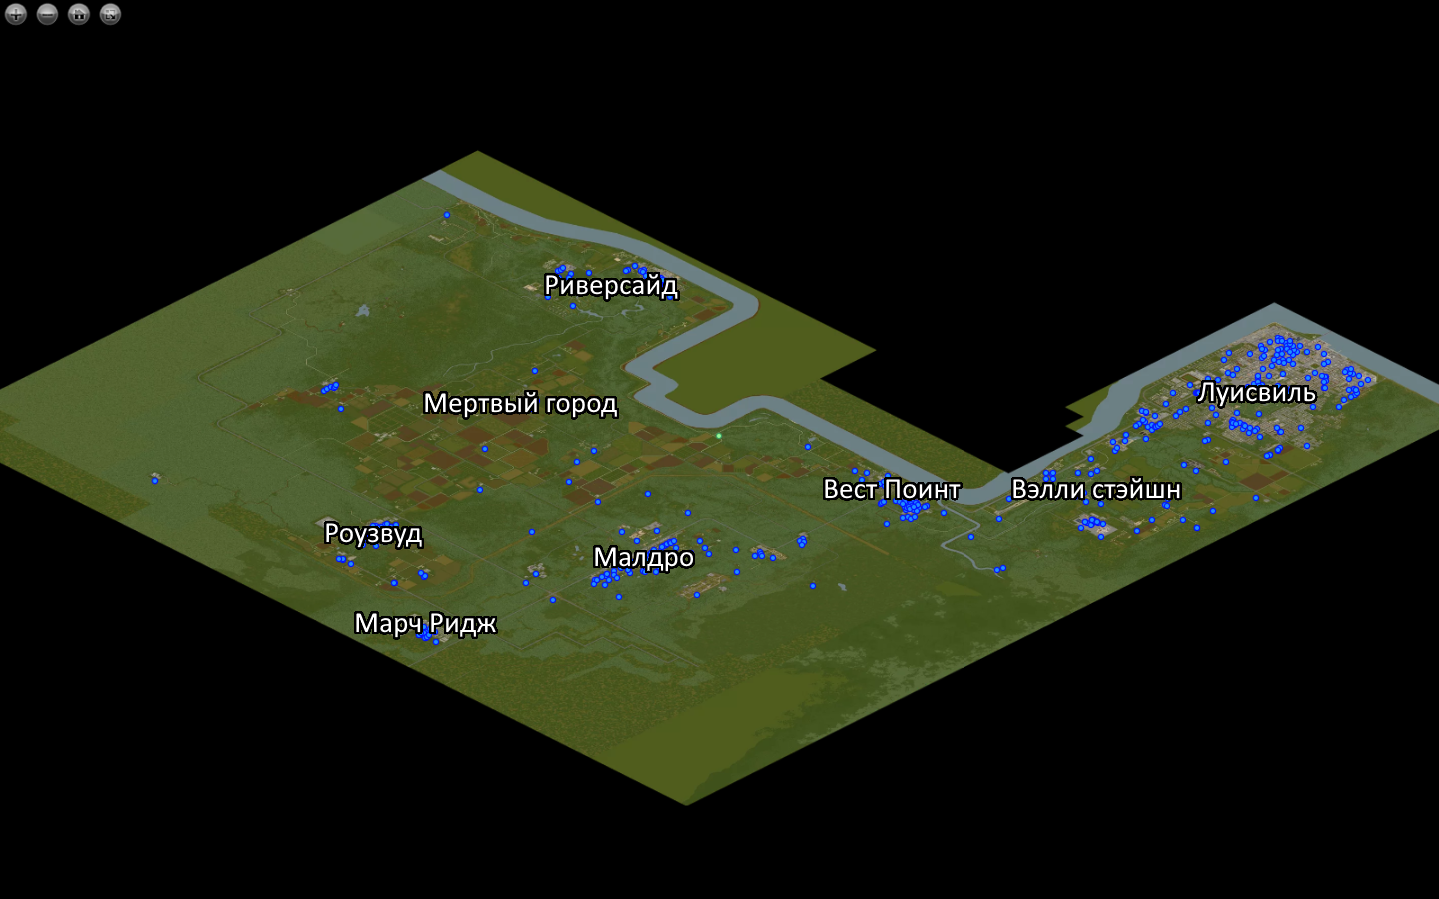 {{:cities:pz_map_with_city_nameplates.png?600|